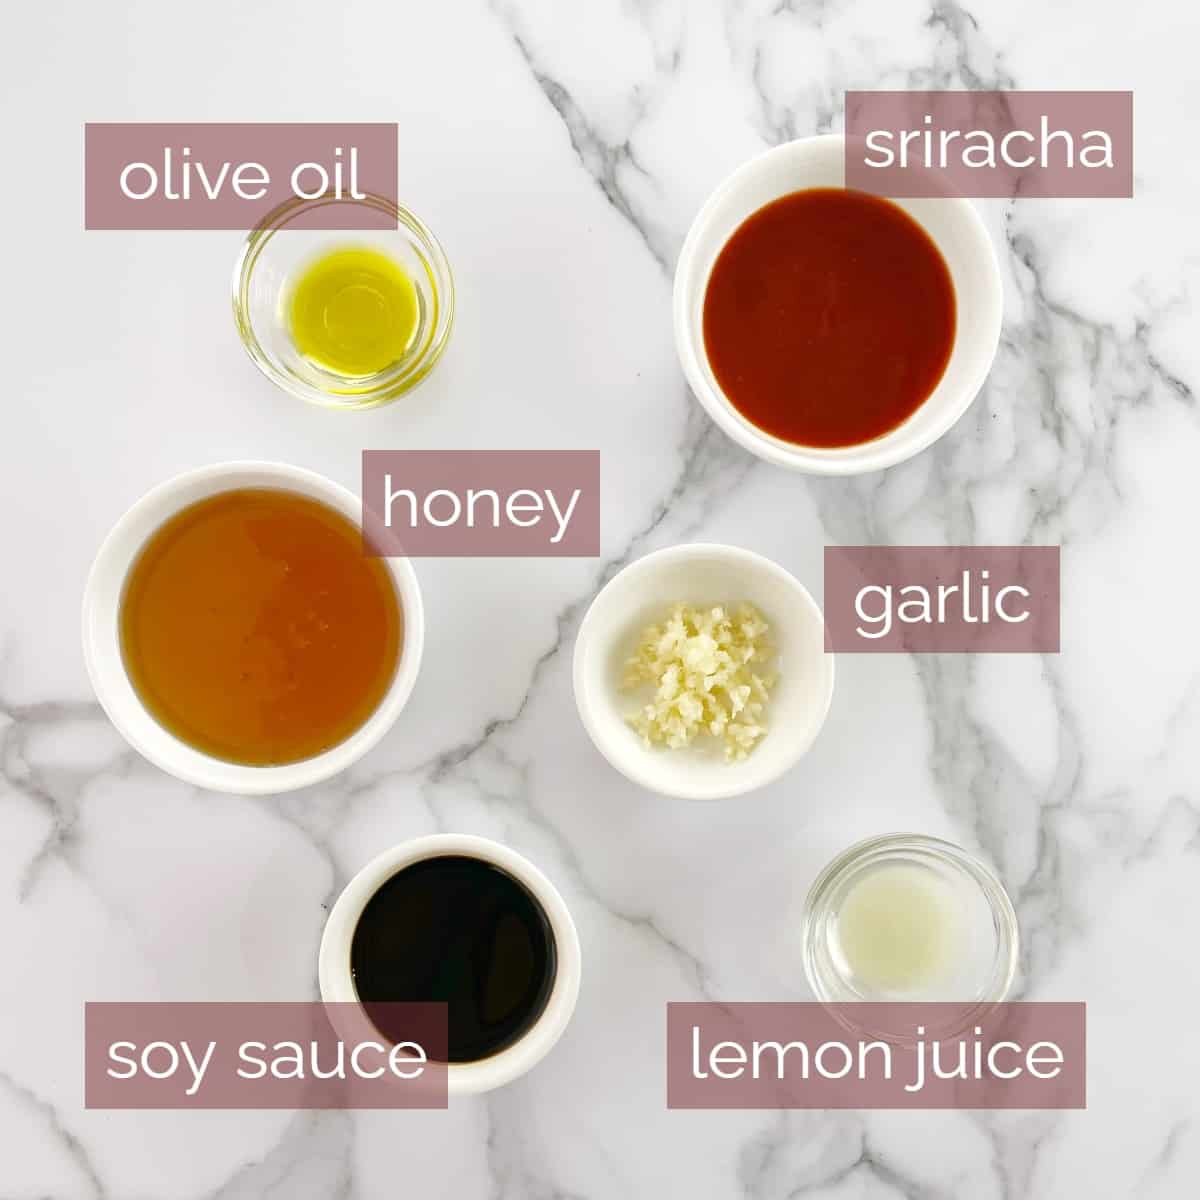 graphic showing ingredients needed to make this recipe along with labels.